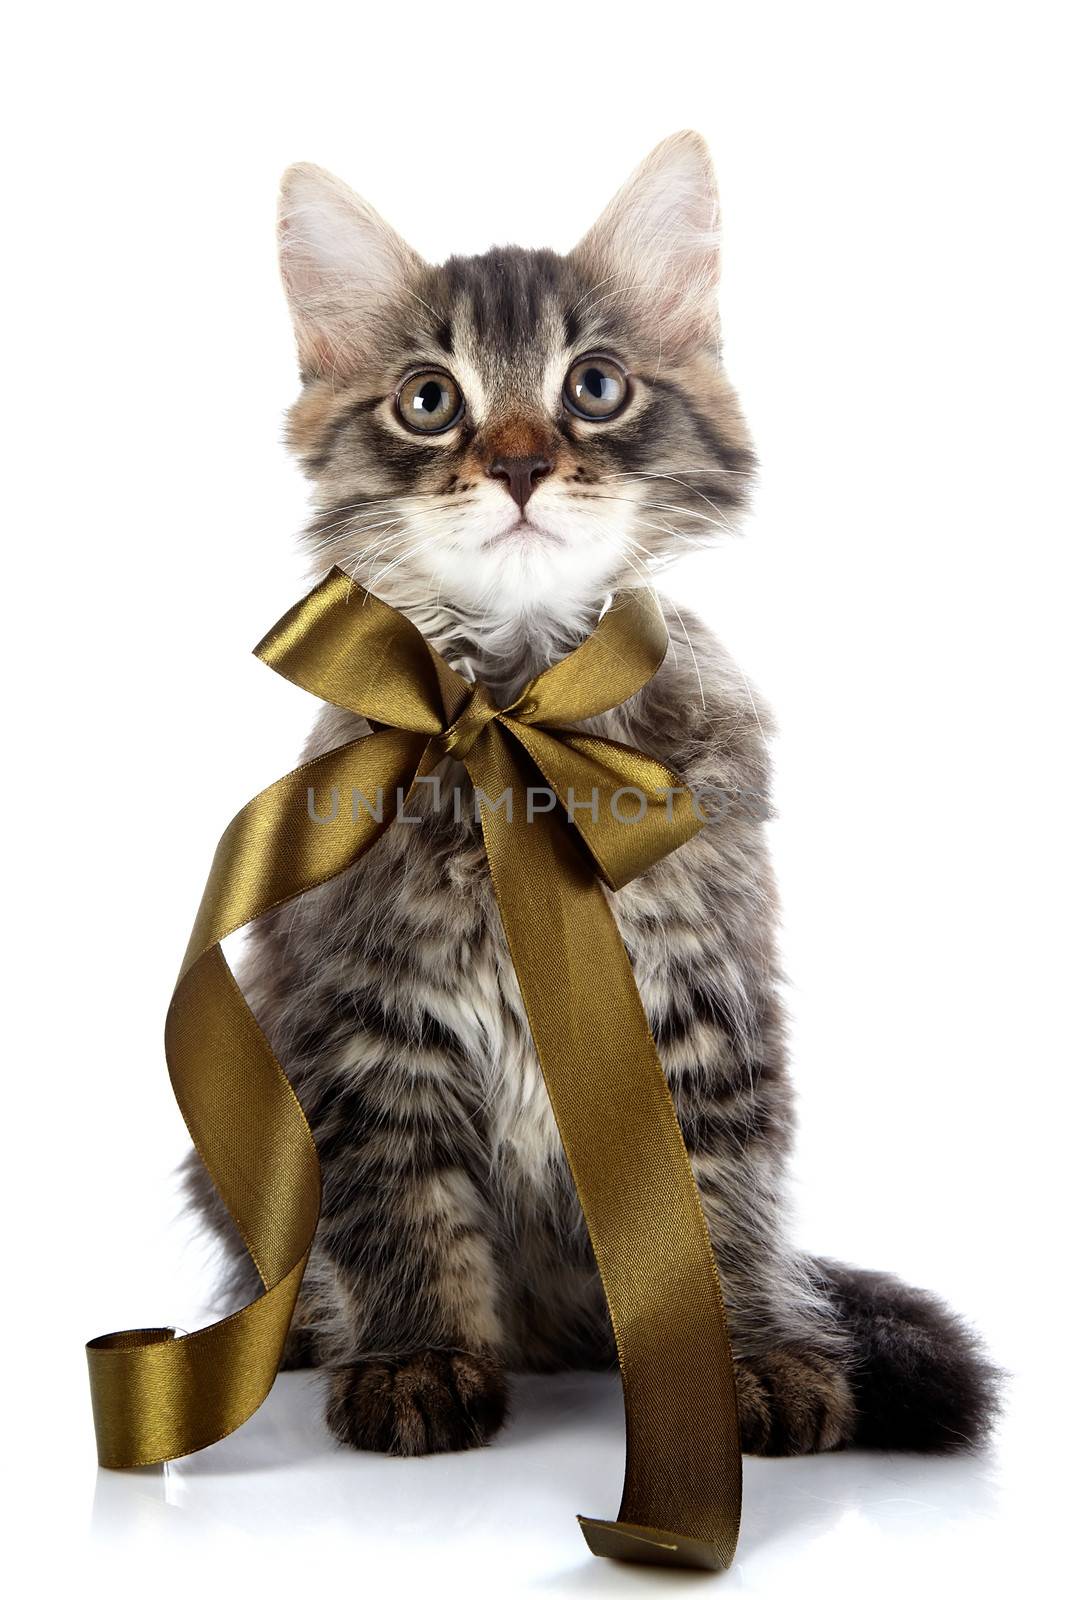 Striped fluffy cat with a tape. Striped not purebred kitten. Kitten on a white background. Small predator. Small cat.